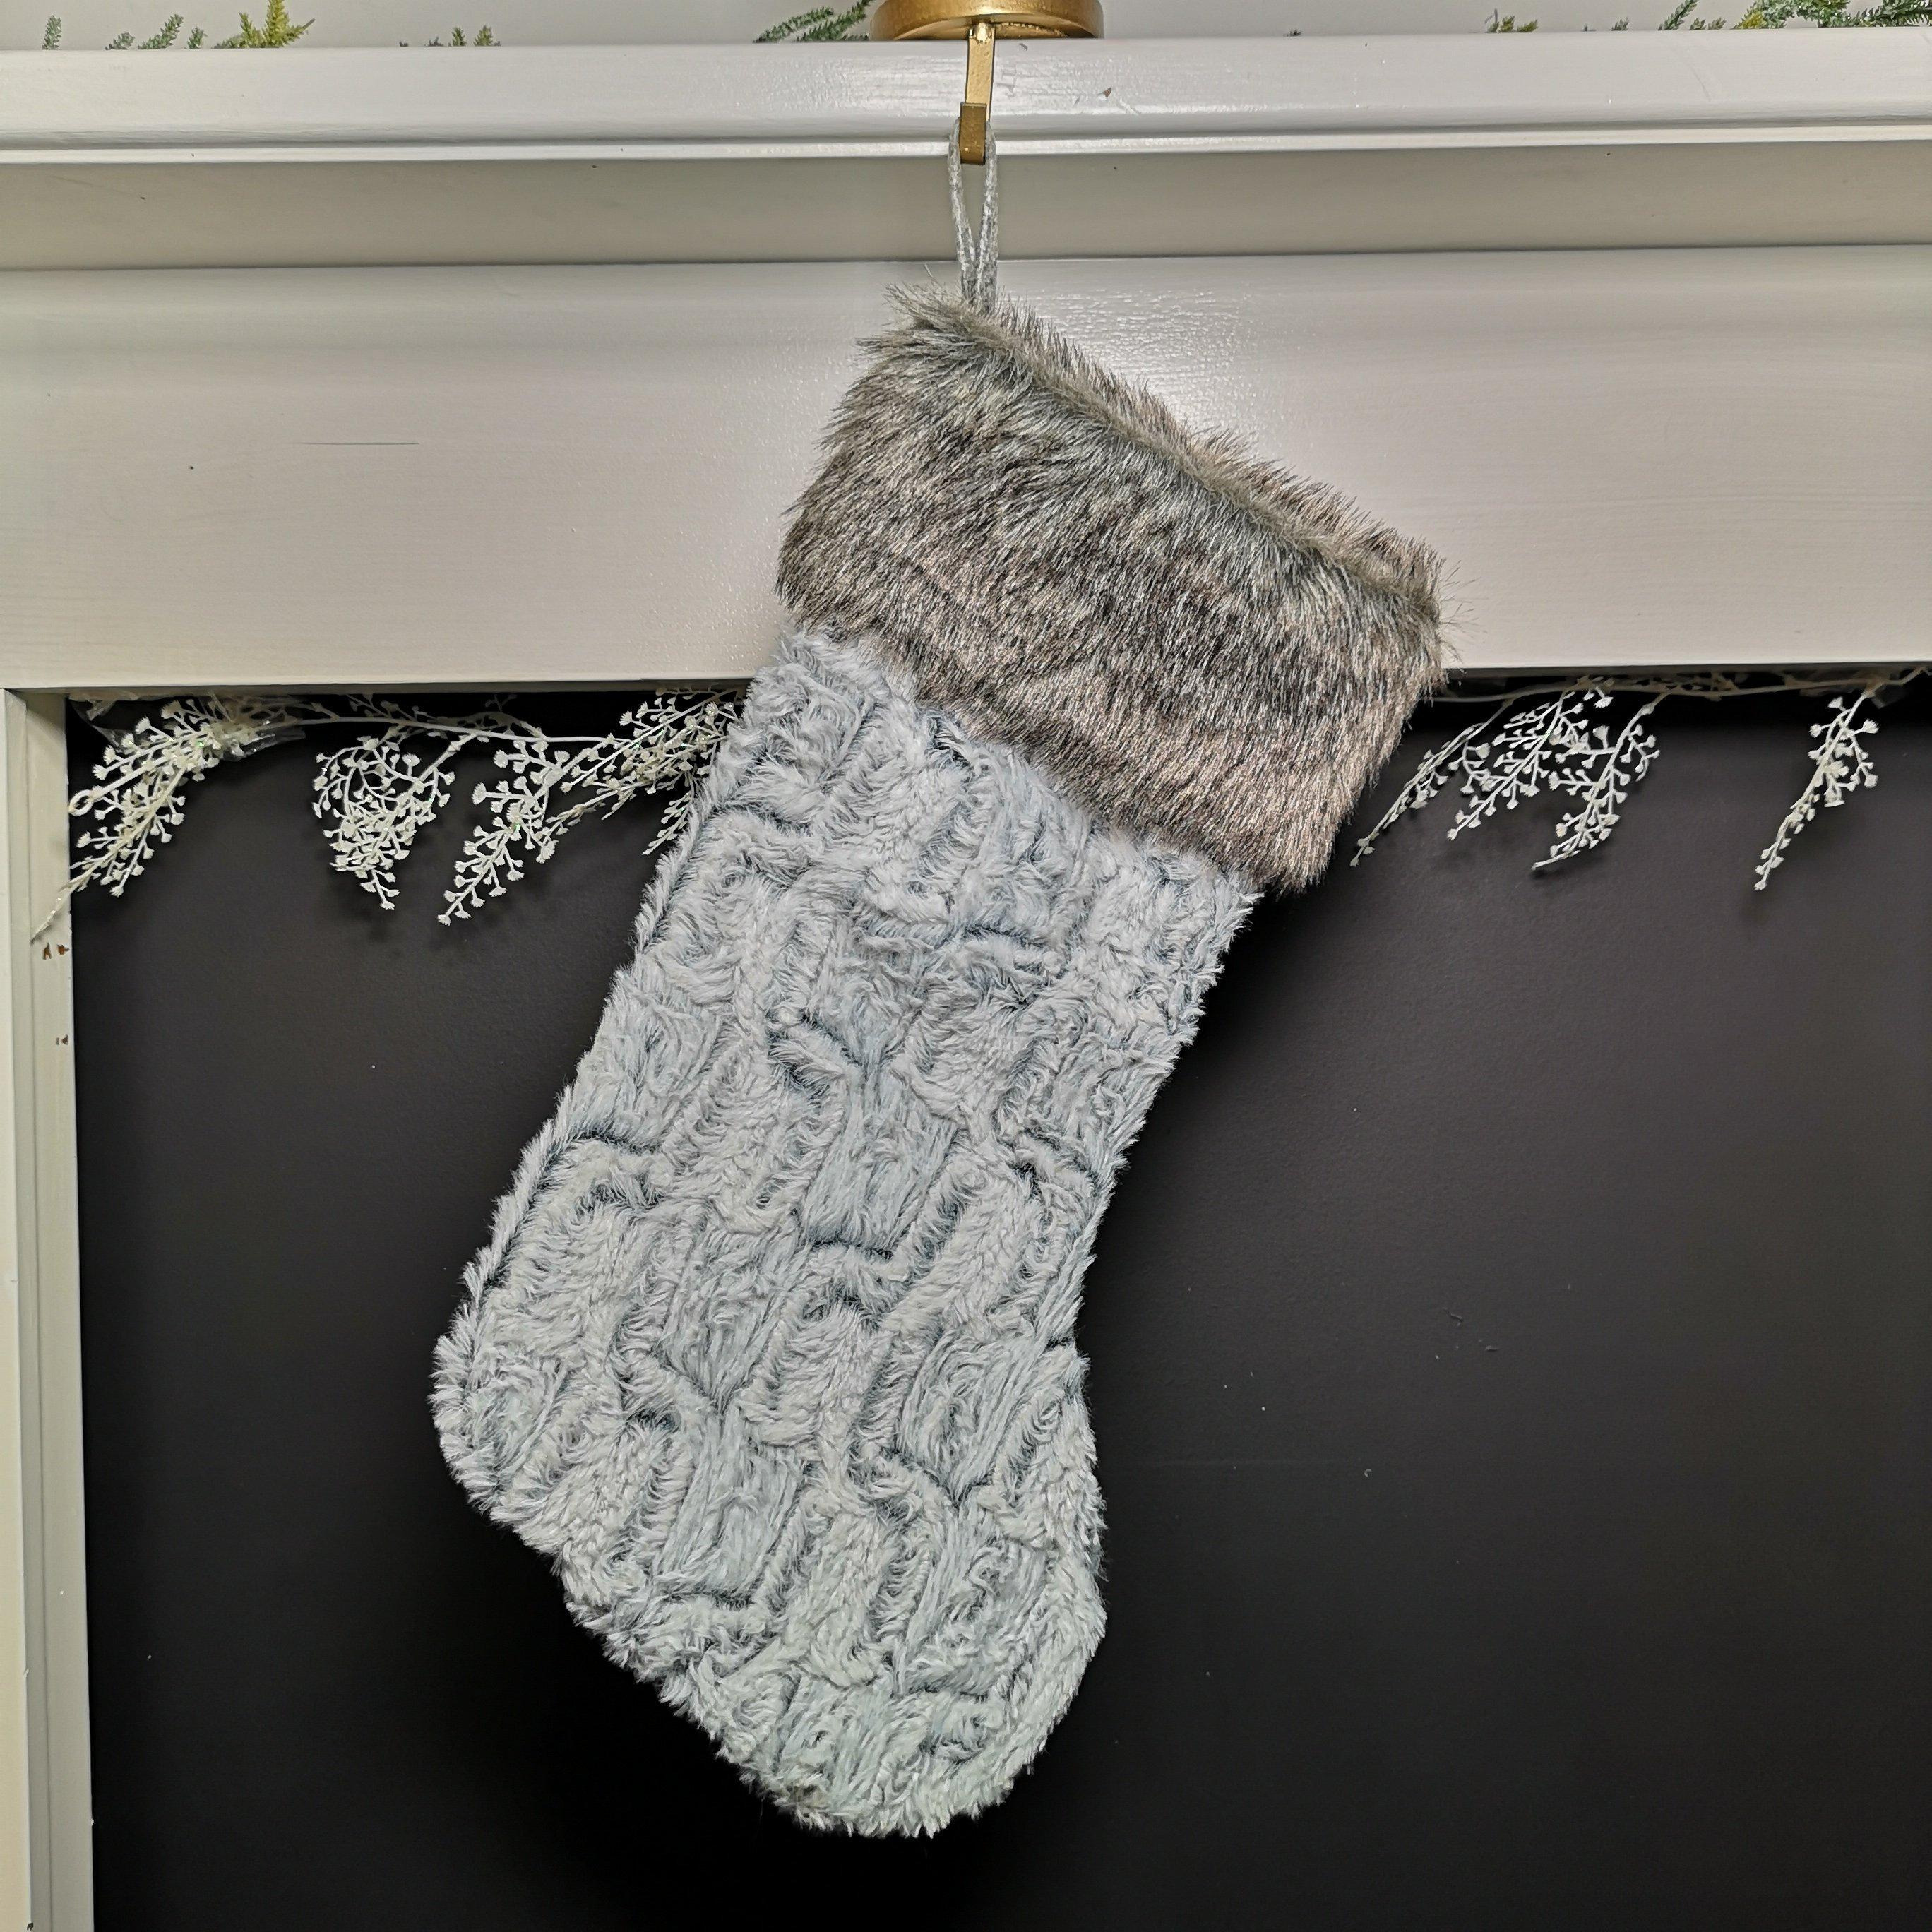 48cm Festive Christmas Stocking Hanging Decoration in Grey with Fur Trim - image 1